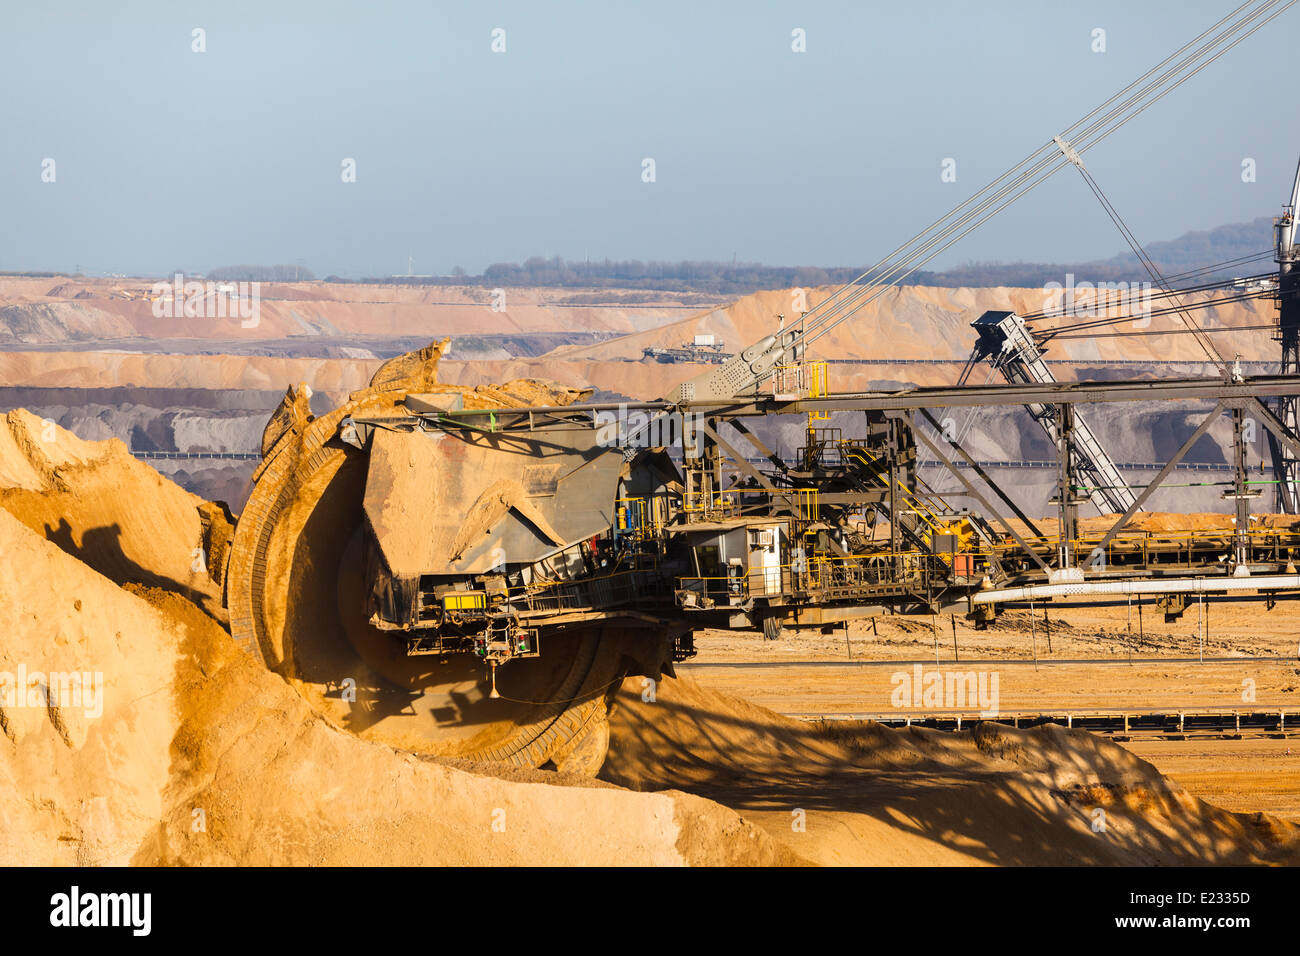 A giant Bucket Wheel Excavator at work in a lignite pit mine Stock Photo